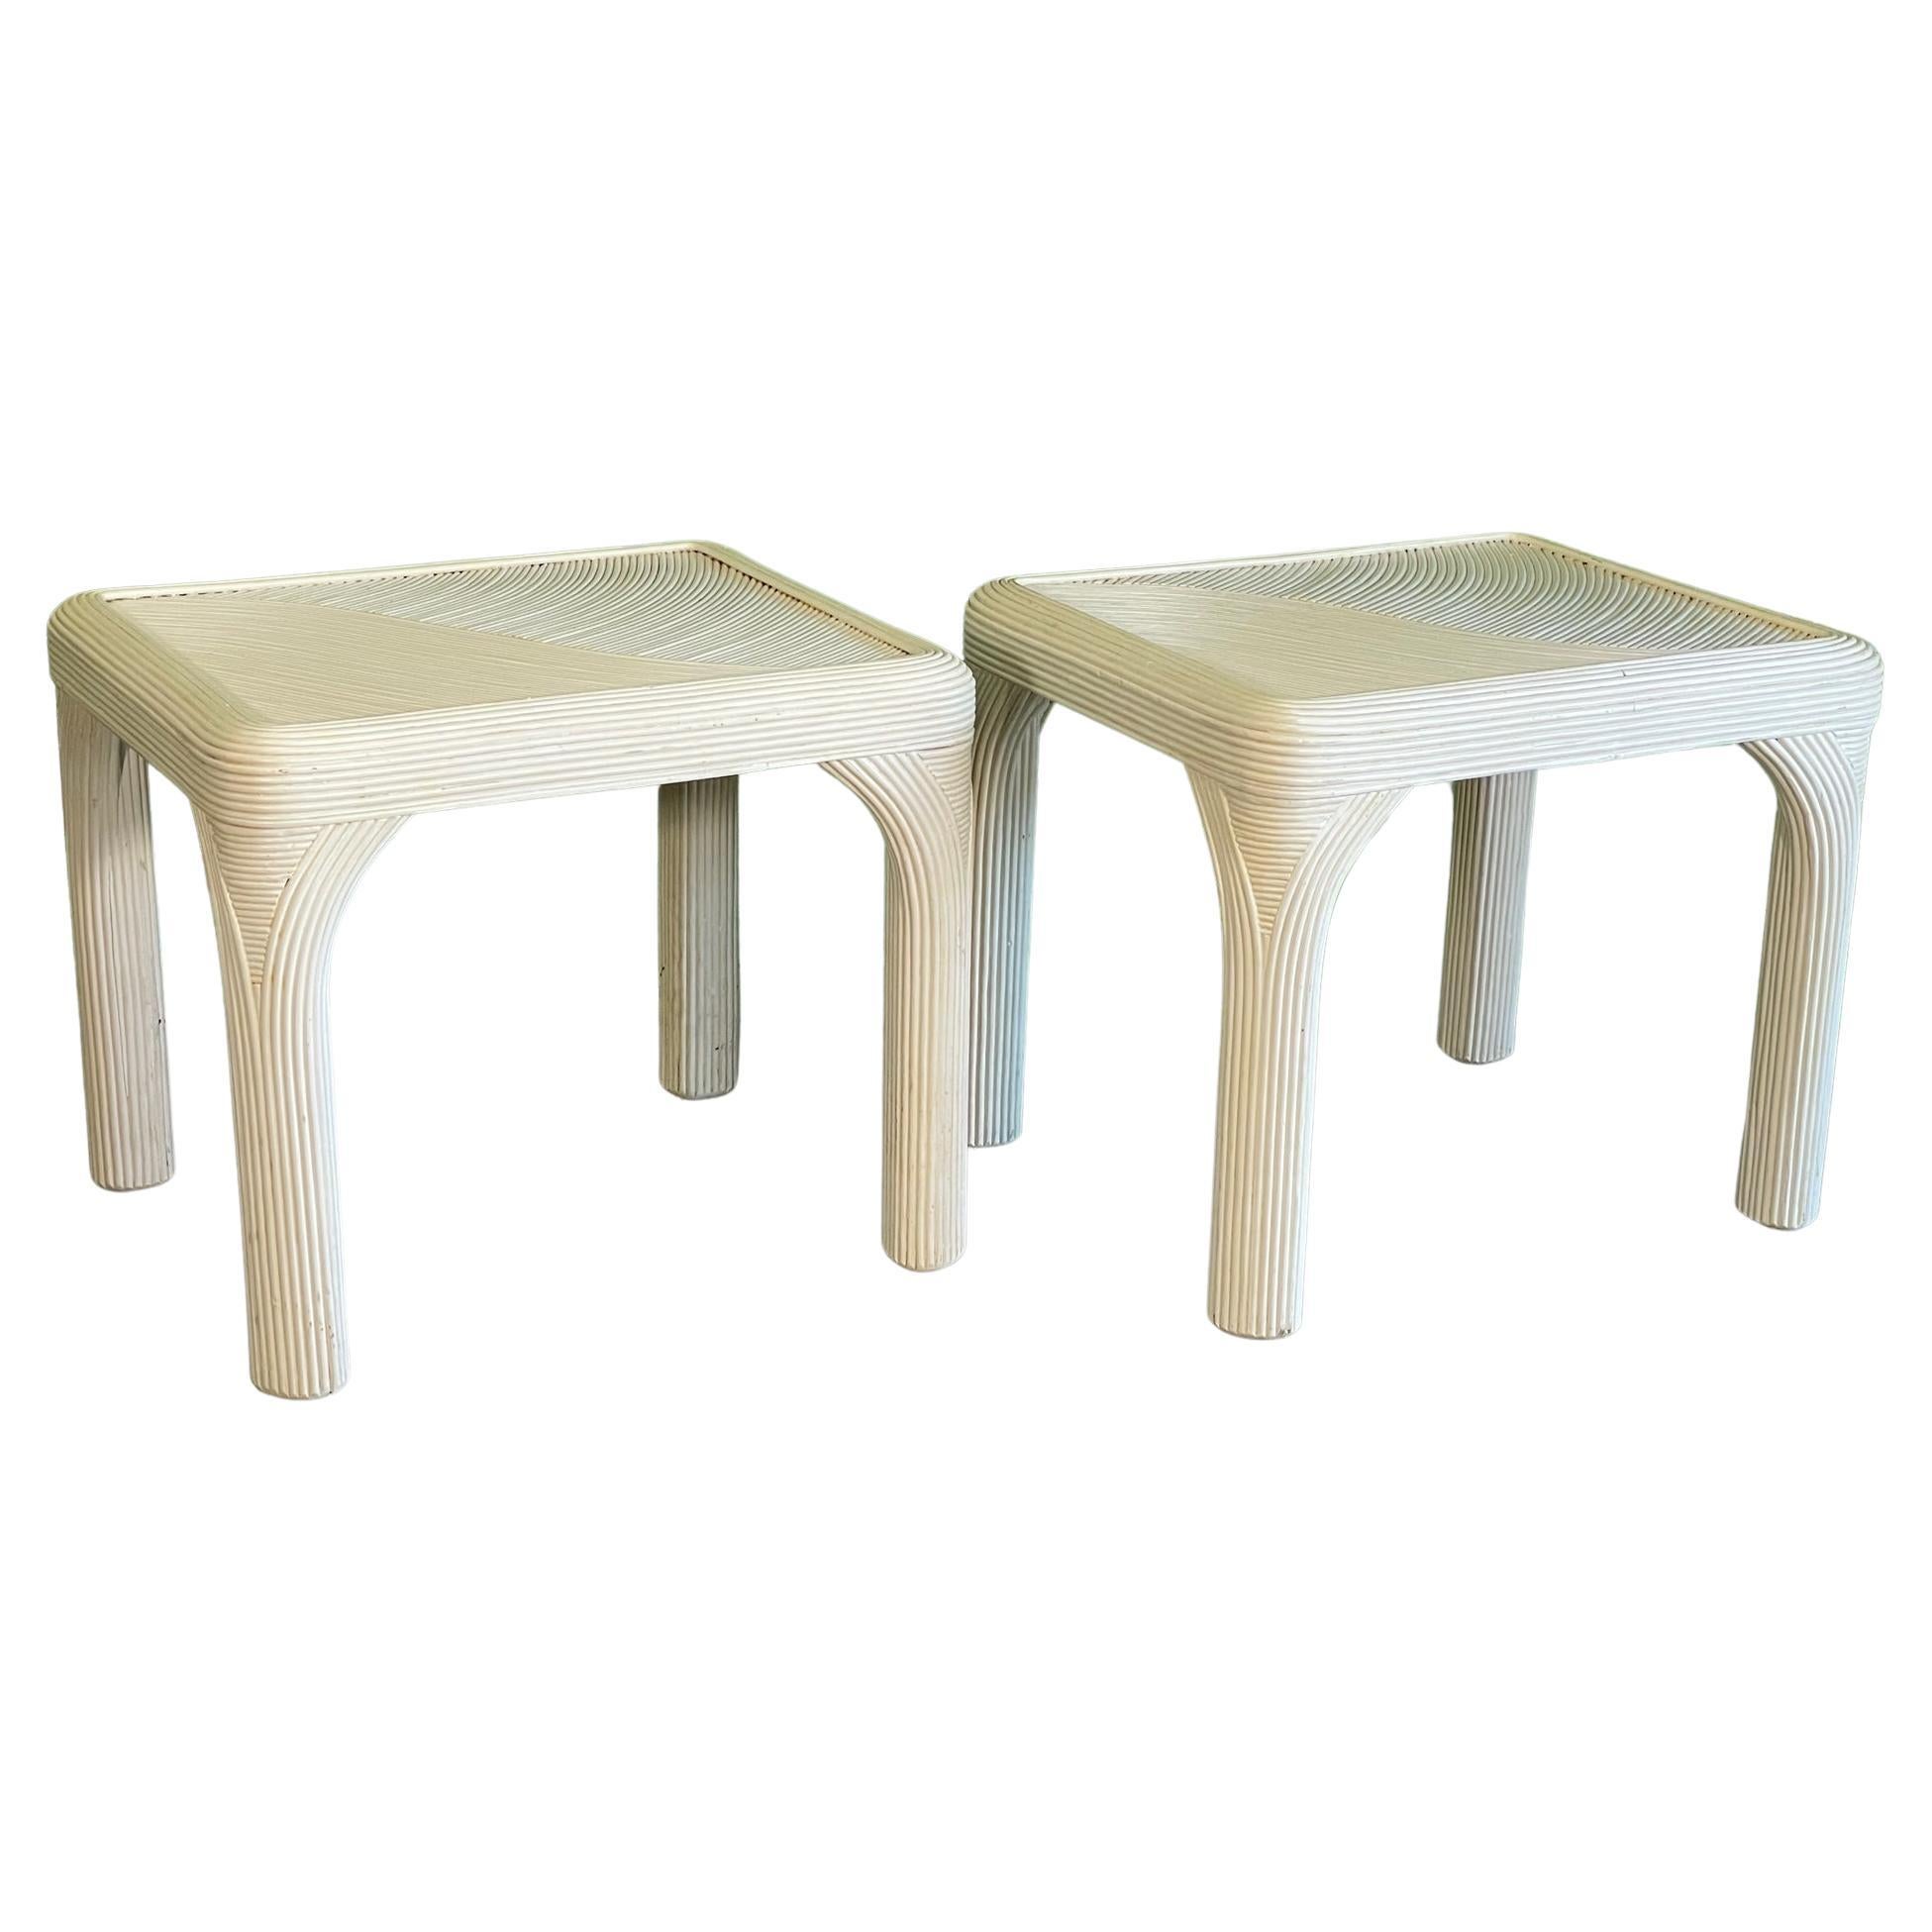 Pencil Reed Rattan End Tables, a Pair